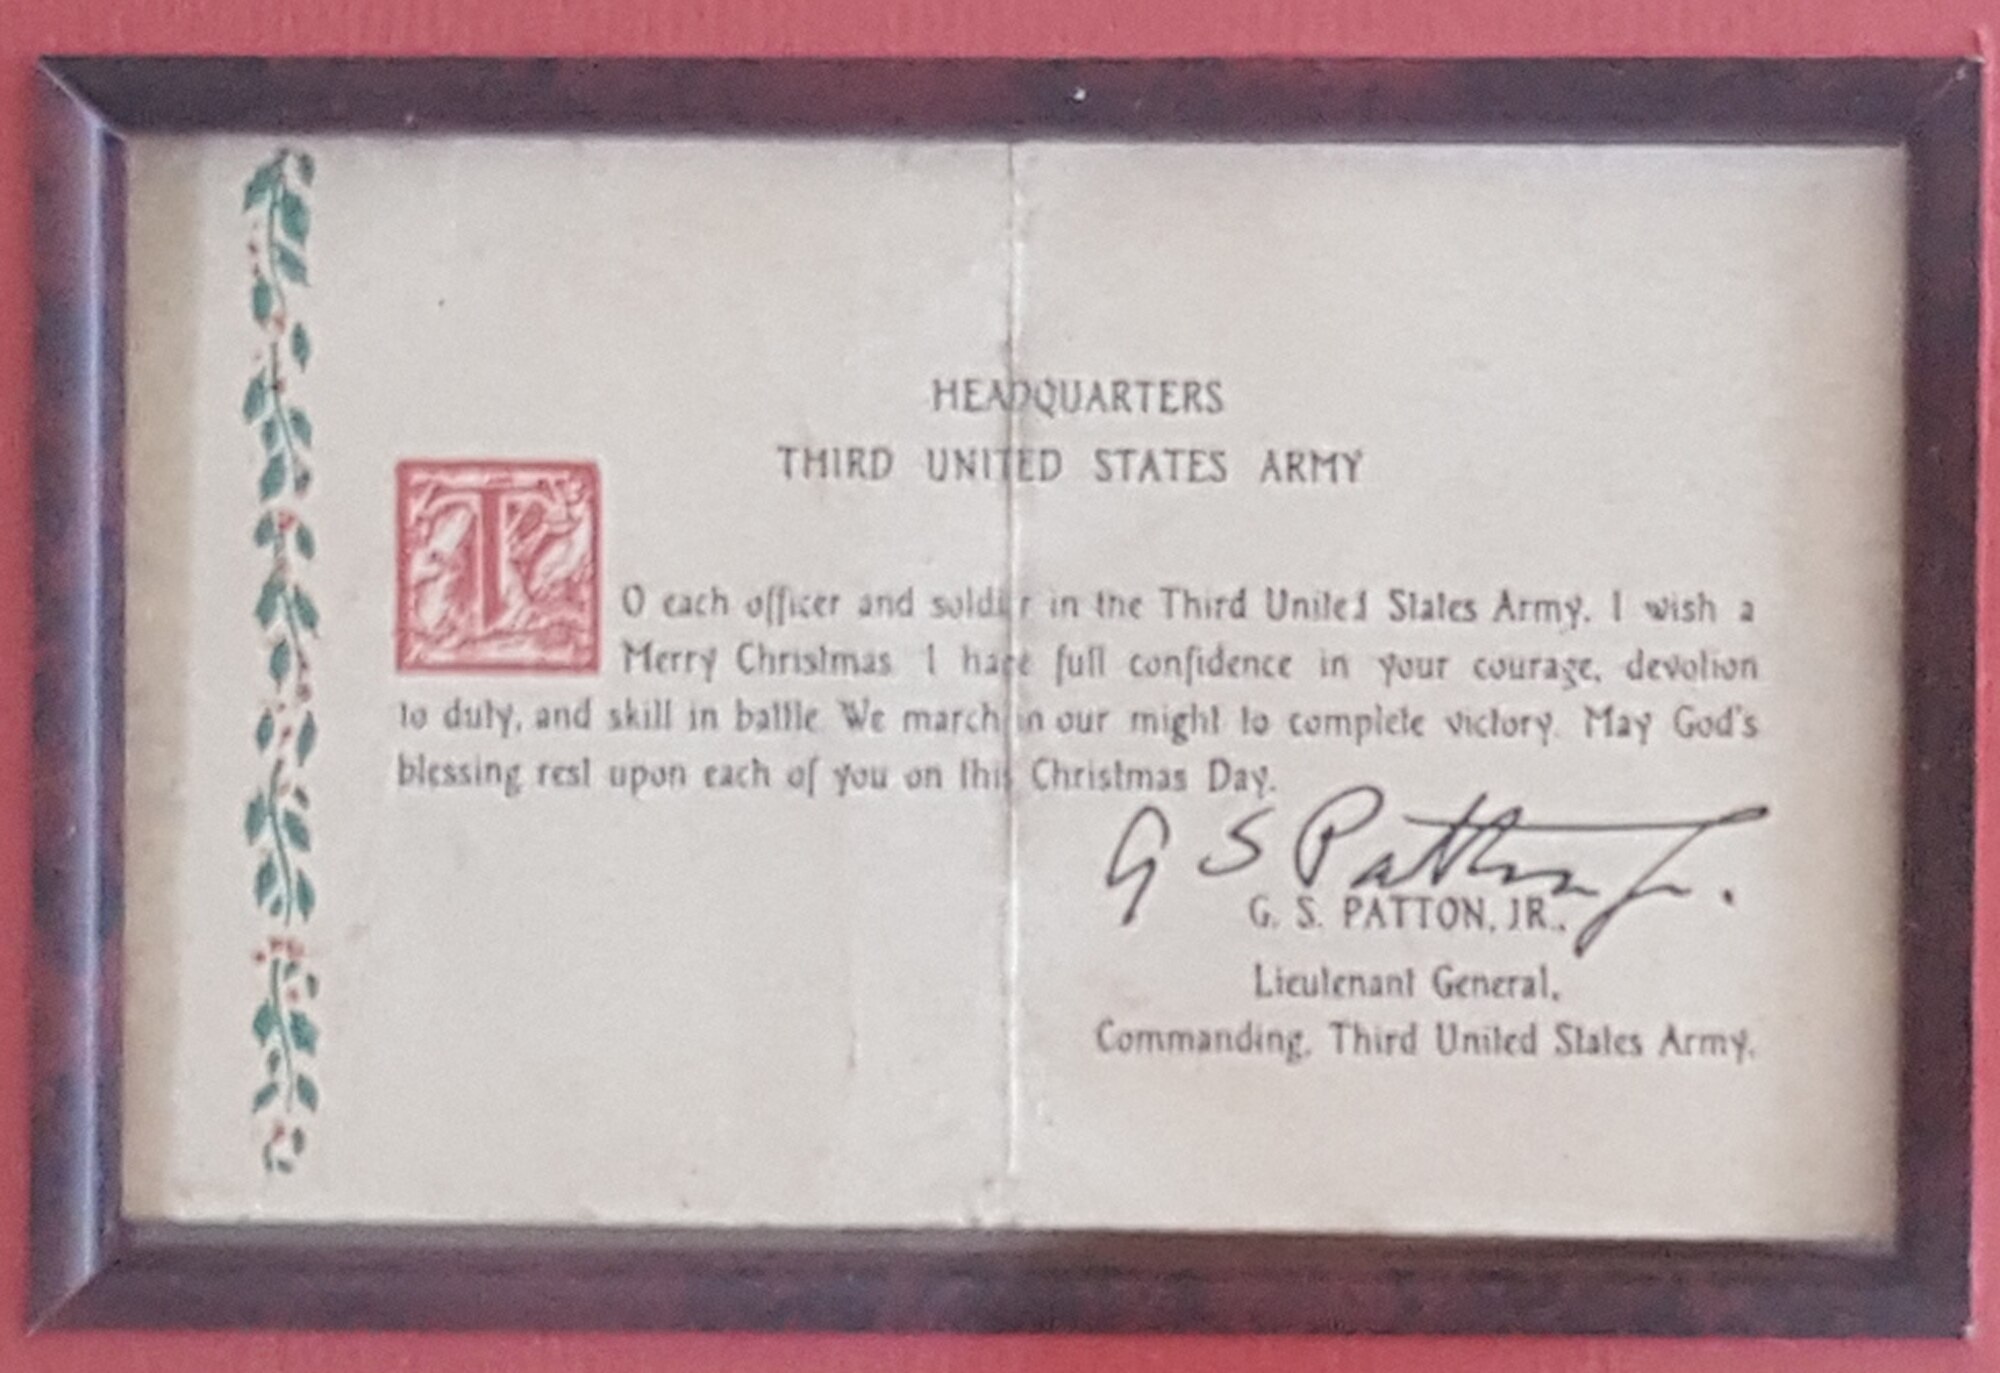 Tony Duno kept this Christmas card from Gen. George Patton in his wallet for decades before his family convinced him to frame it. (Courtesy photo)